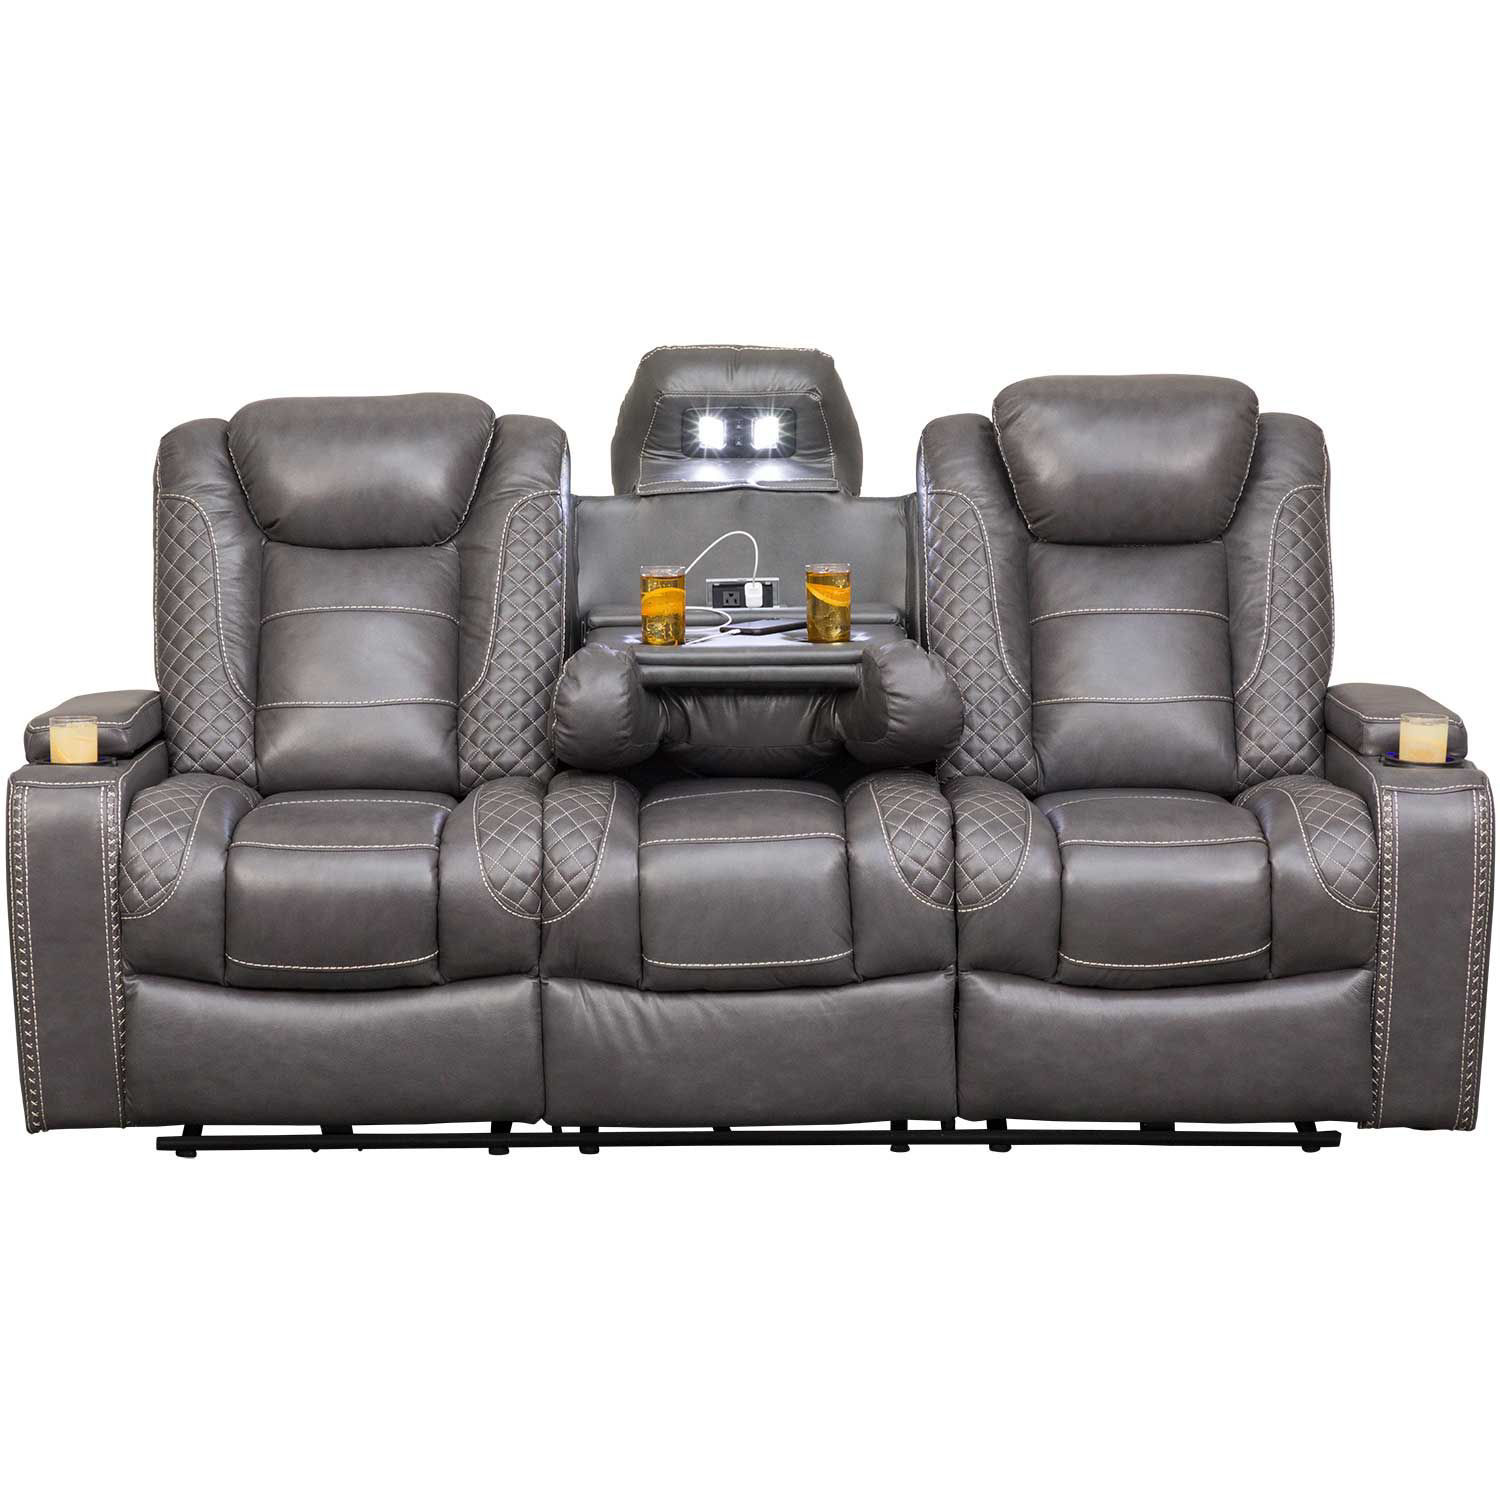 Orion Power Reclining Sofa with Adjustable Headrest 15131